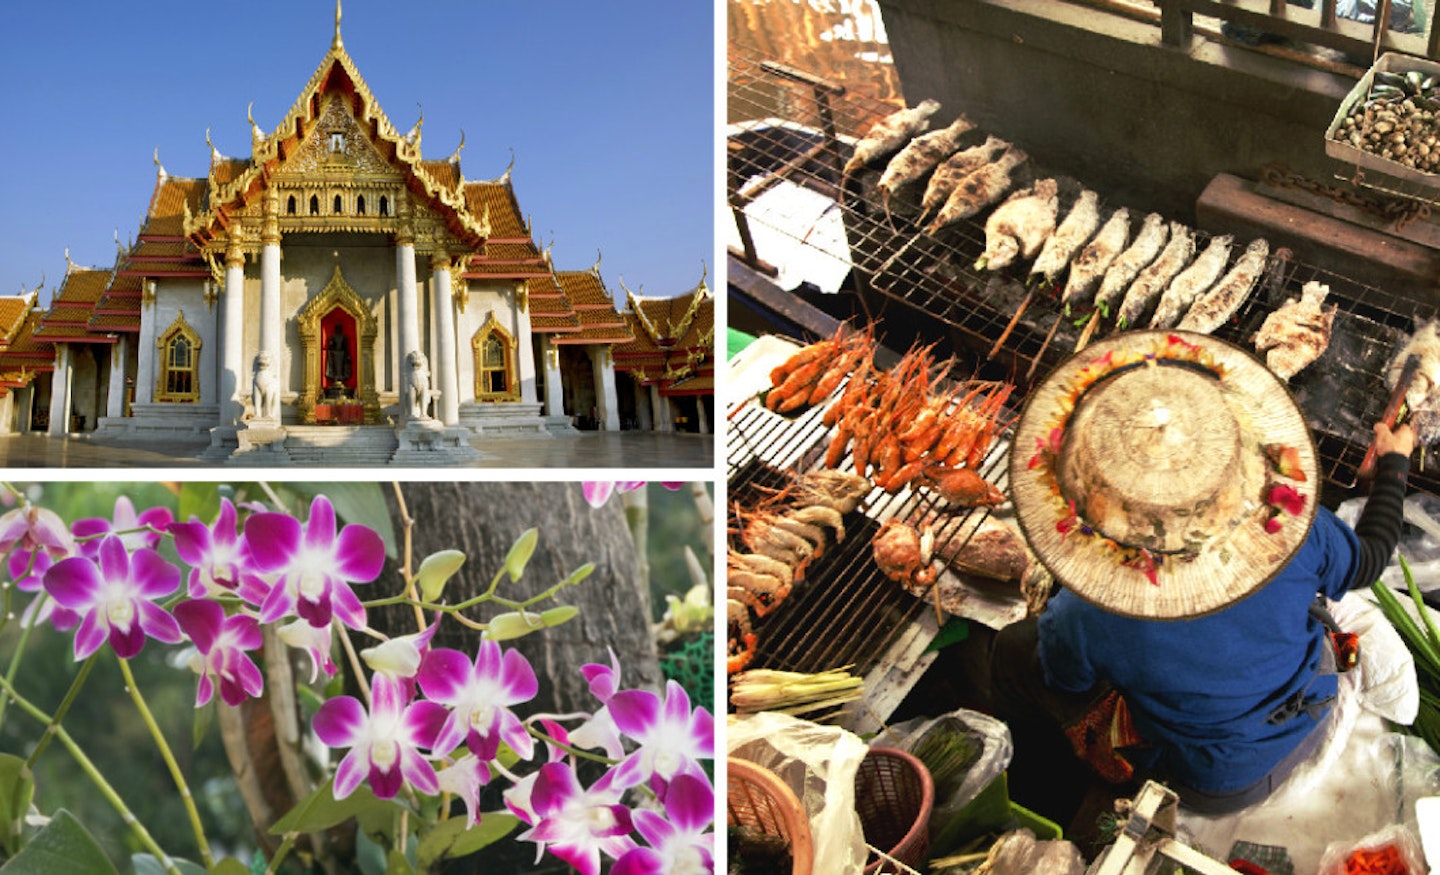 From the bright orchids, to the Wat Benchamabophit Temple, to the Tangling Chan 'Floating market', Bangkok is definitely worth a trip [Rex Features]